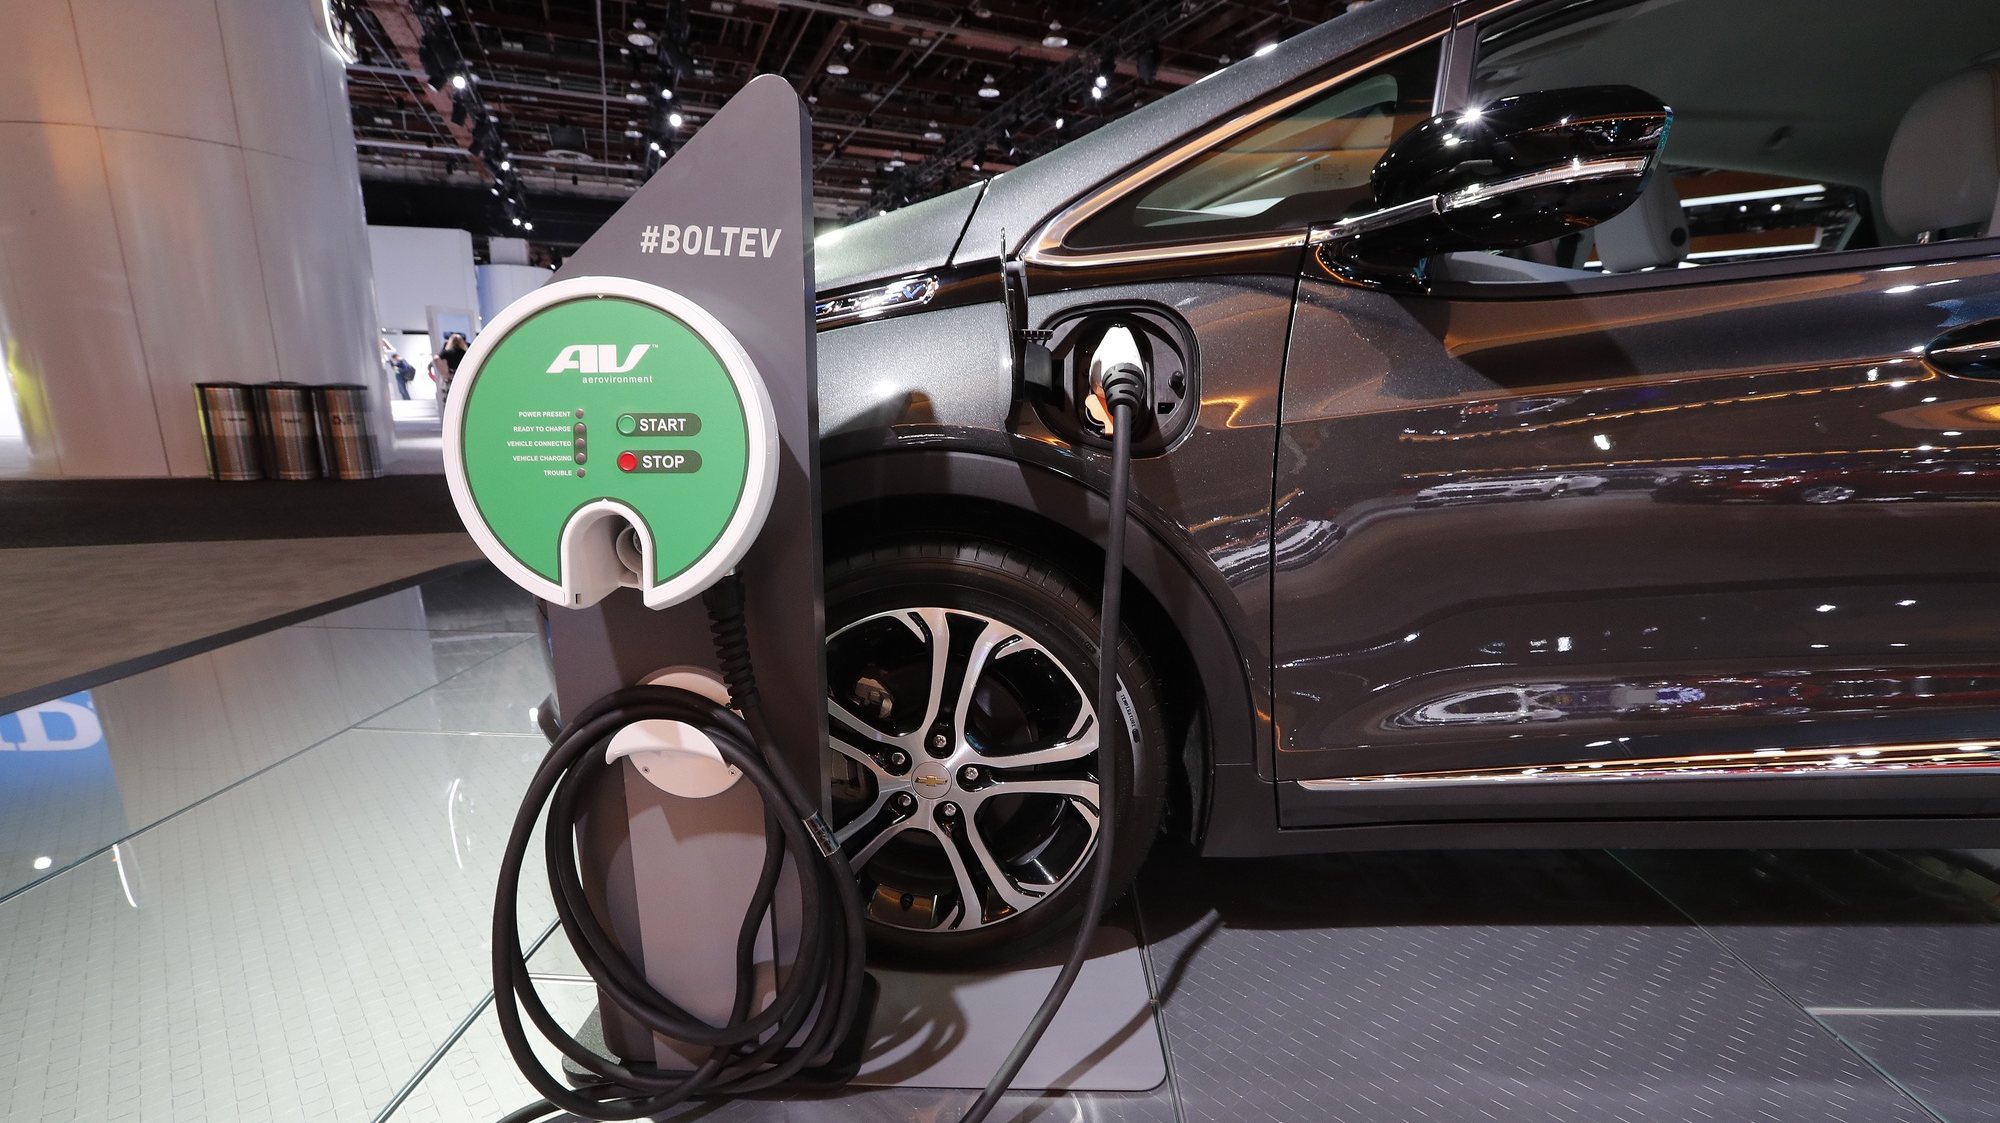 epa07287103 A Chevrolet Bolt EV electric car and electric fuel station at the North American International Auto Show at Cobo Center in Detroit, Michigan, USA, 15 January 2019. The show offers media previews of vehicles and technologies before opening to the public on 19 January.  EPA/JOHN G. MABANGLO